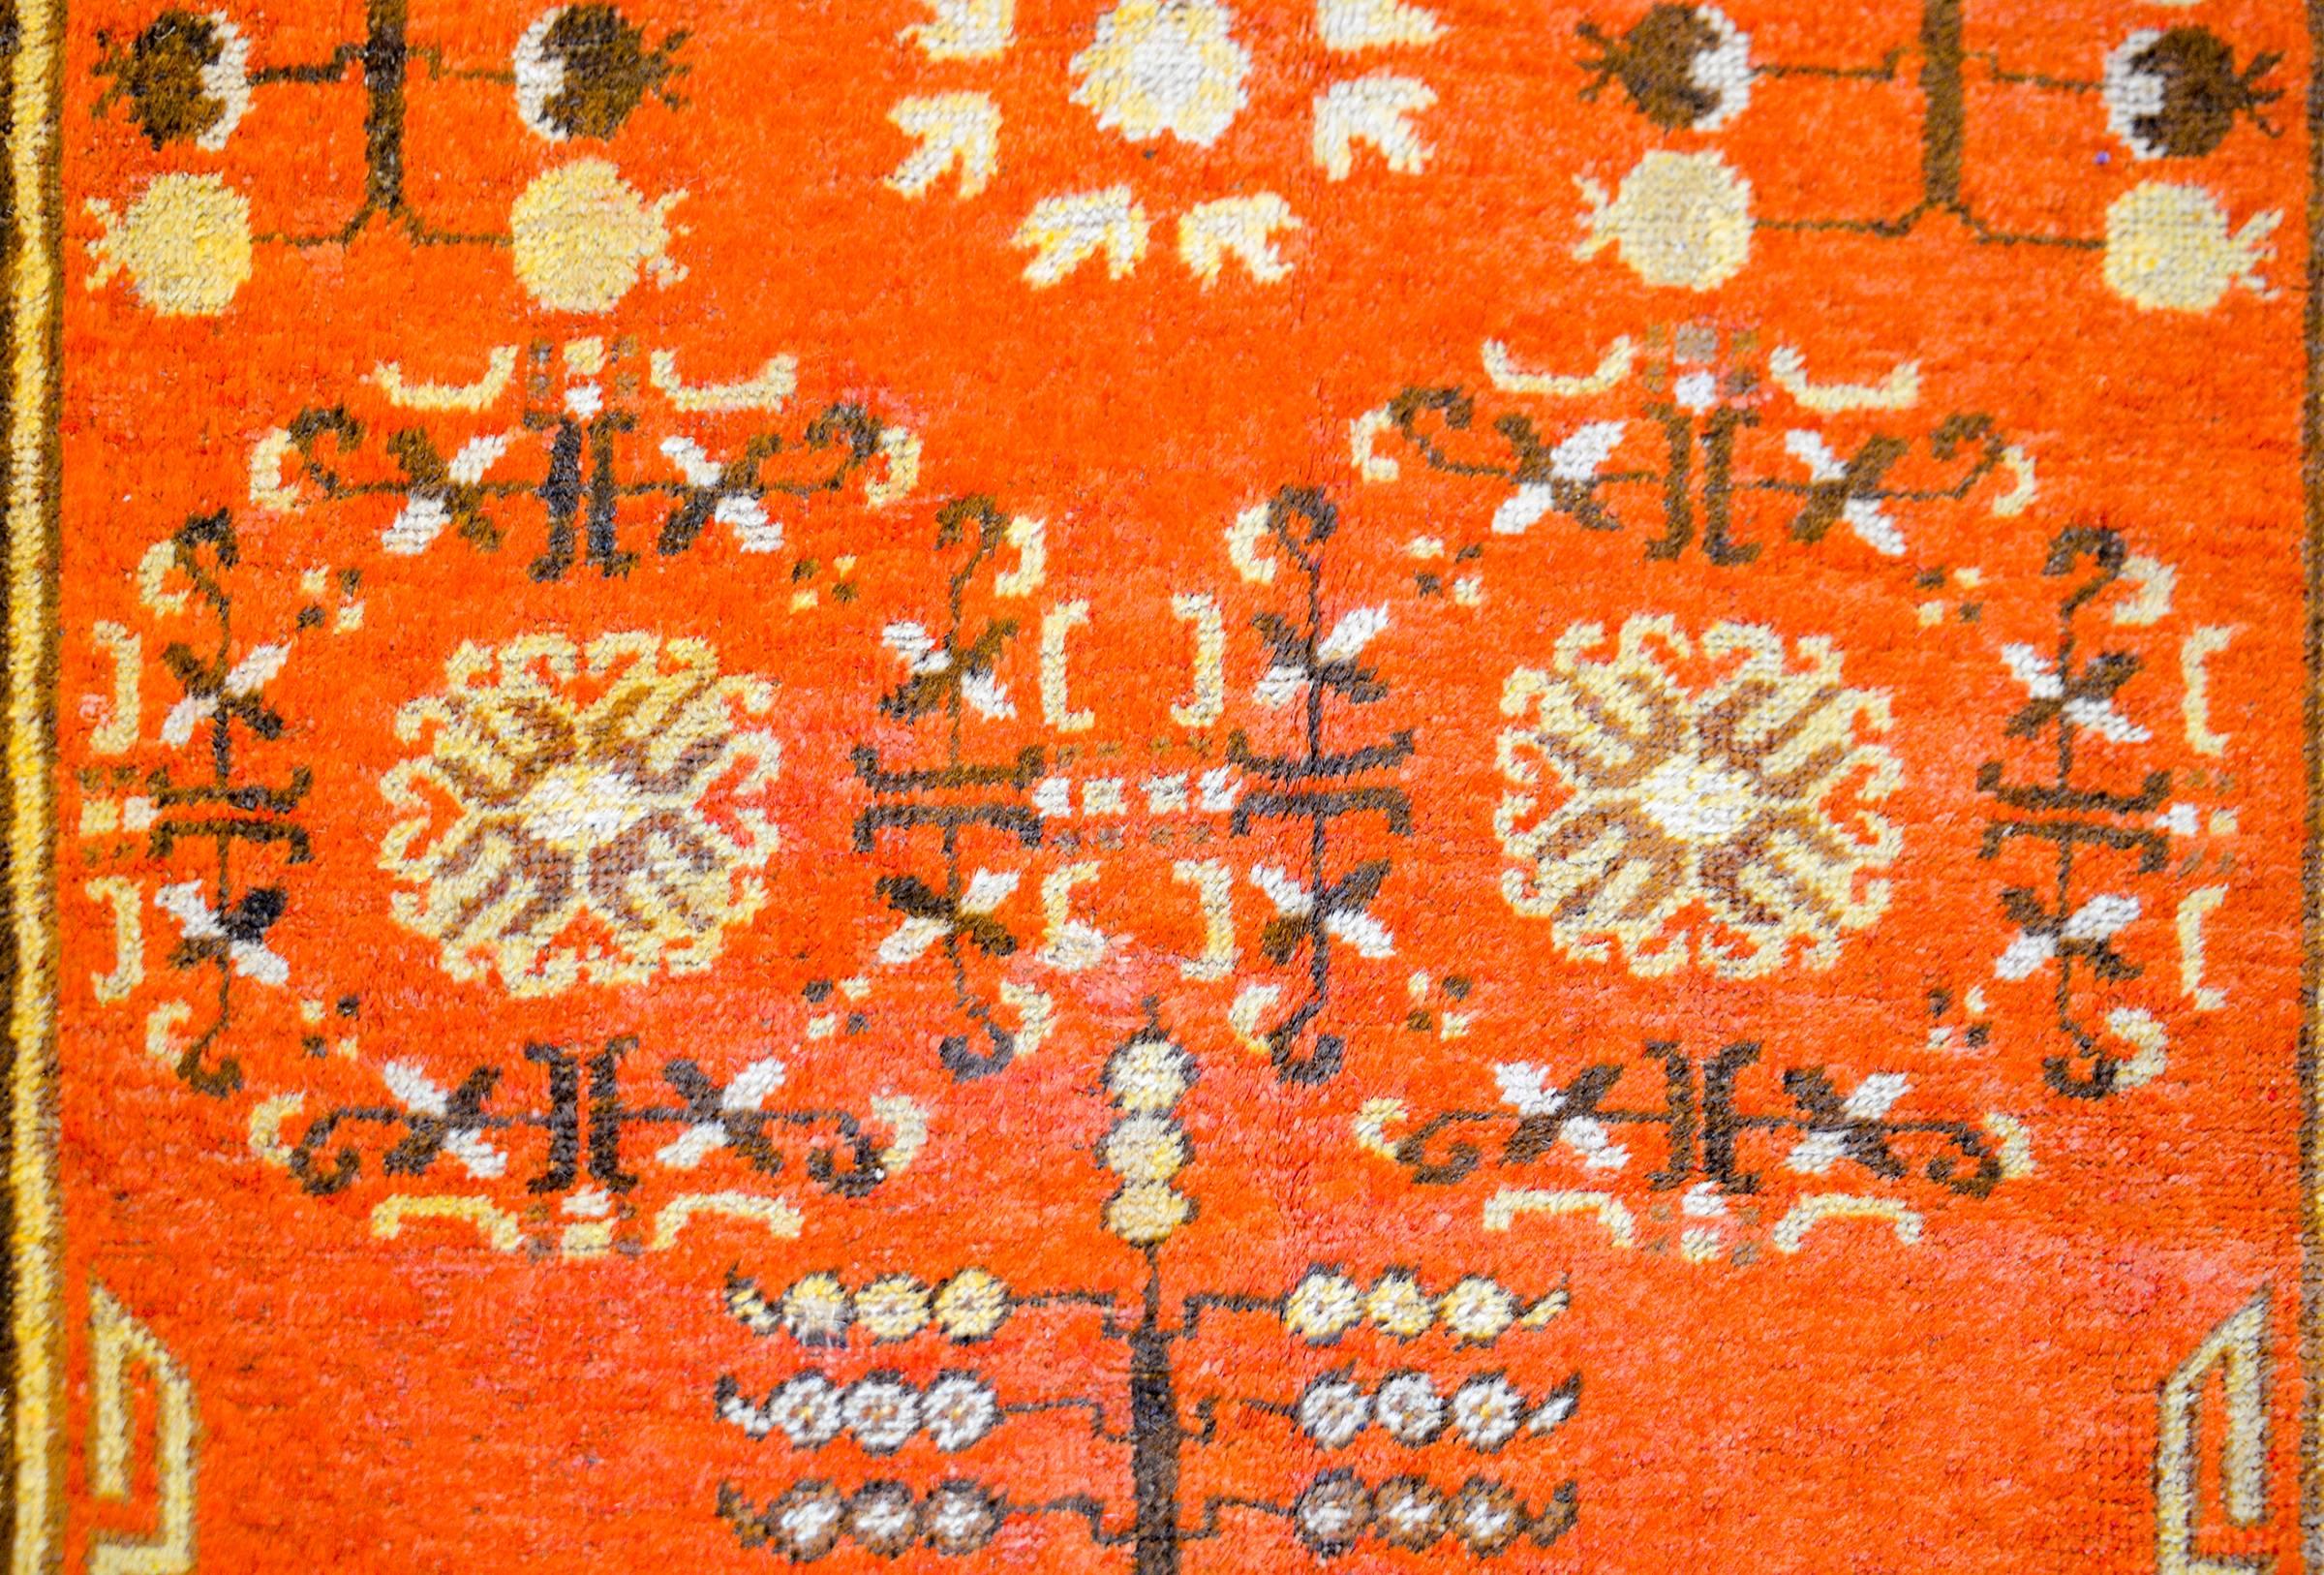 An early 20th century Central Asian Khotan rug with a beautiful orange field of pomegranate, trees-of-life, and floral patterns. The border is wonderfully rendered consisting of Buddhist endless knot patterns, turbulent clouds, and stepped rays of